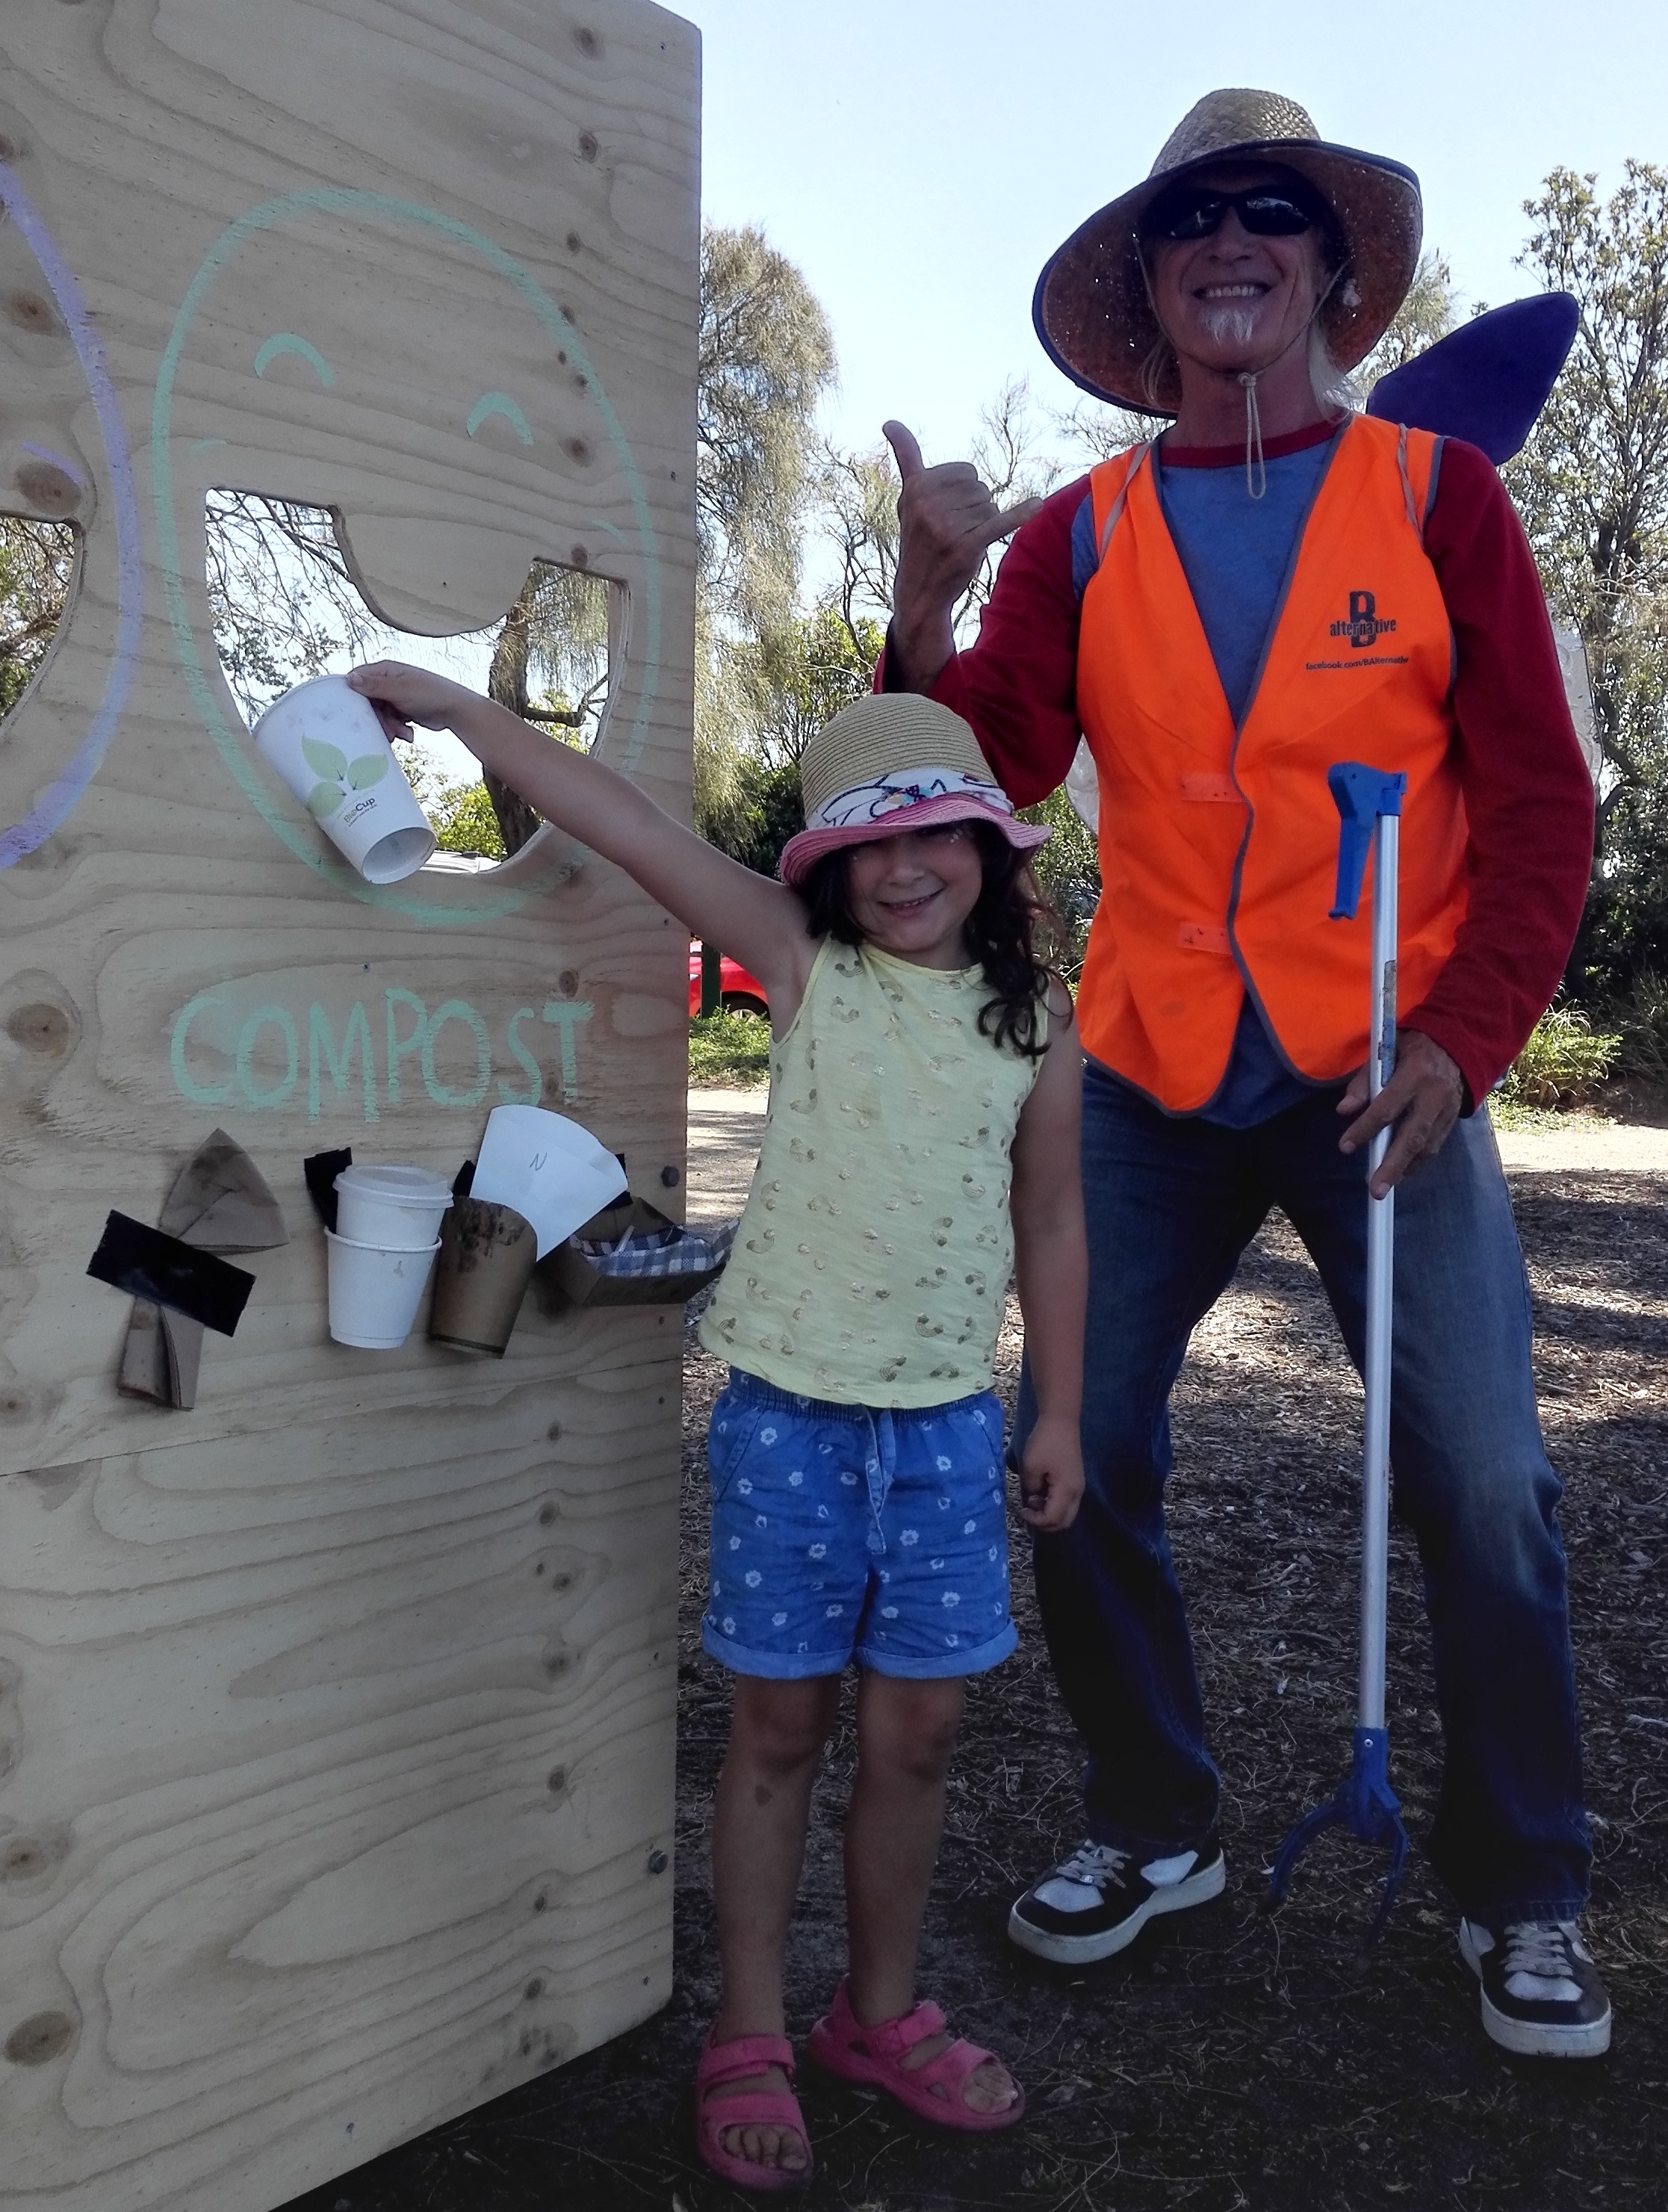 composting at events